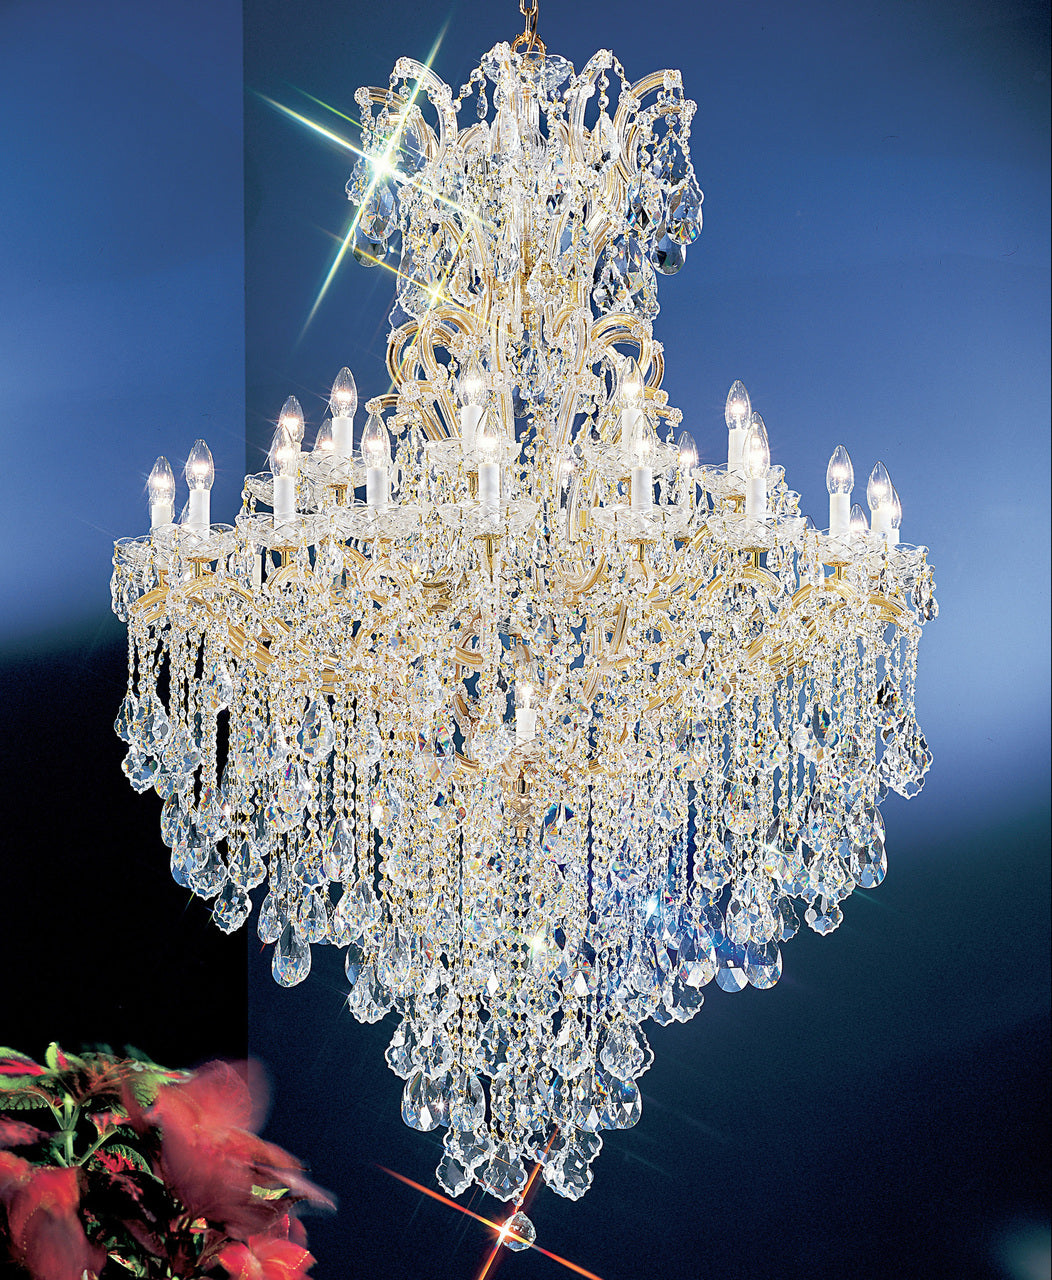 Classic Lighting 8183 OWG S Maria Theresa Traditional Crystal Chandelier in Olde World Gold (Imported from Italy)